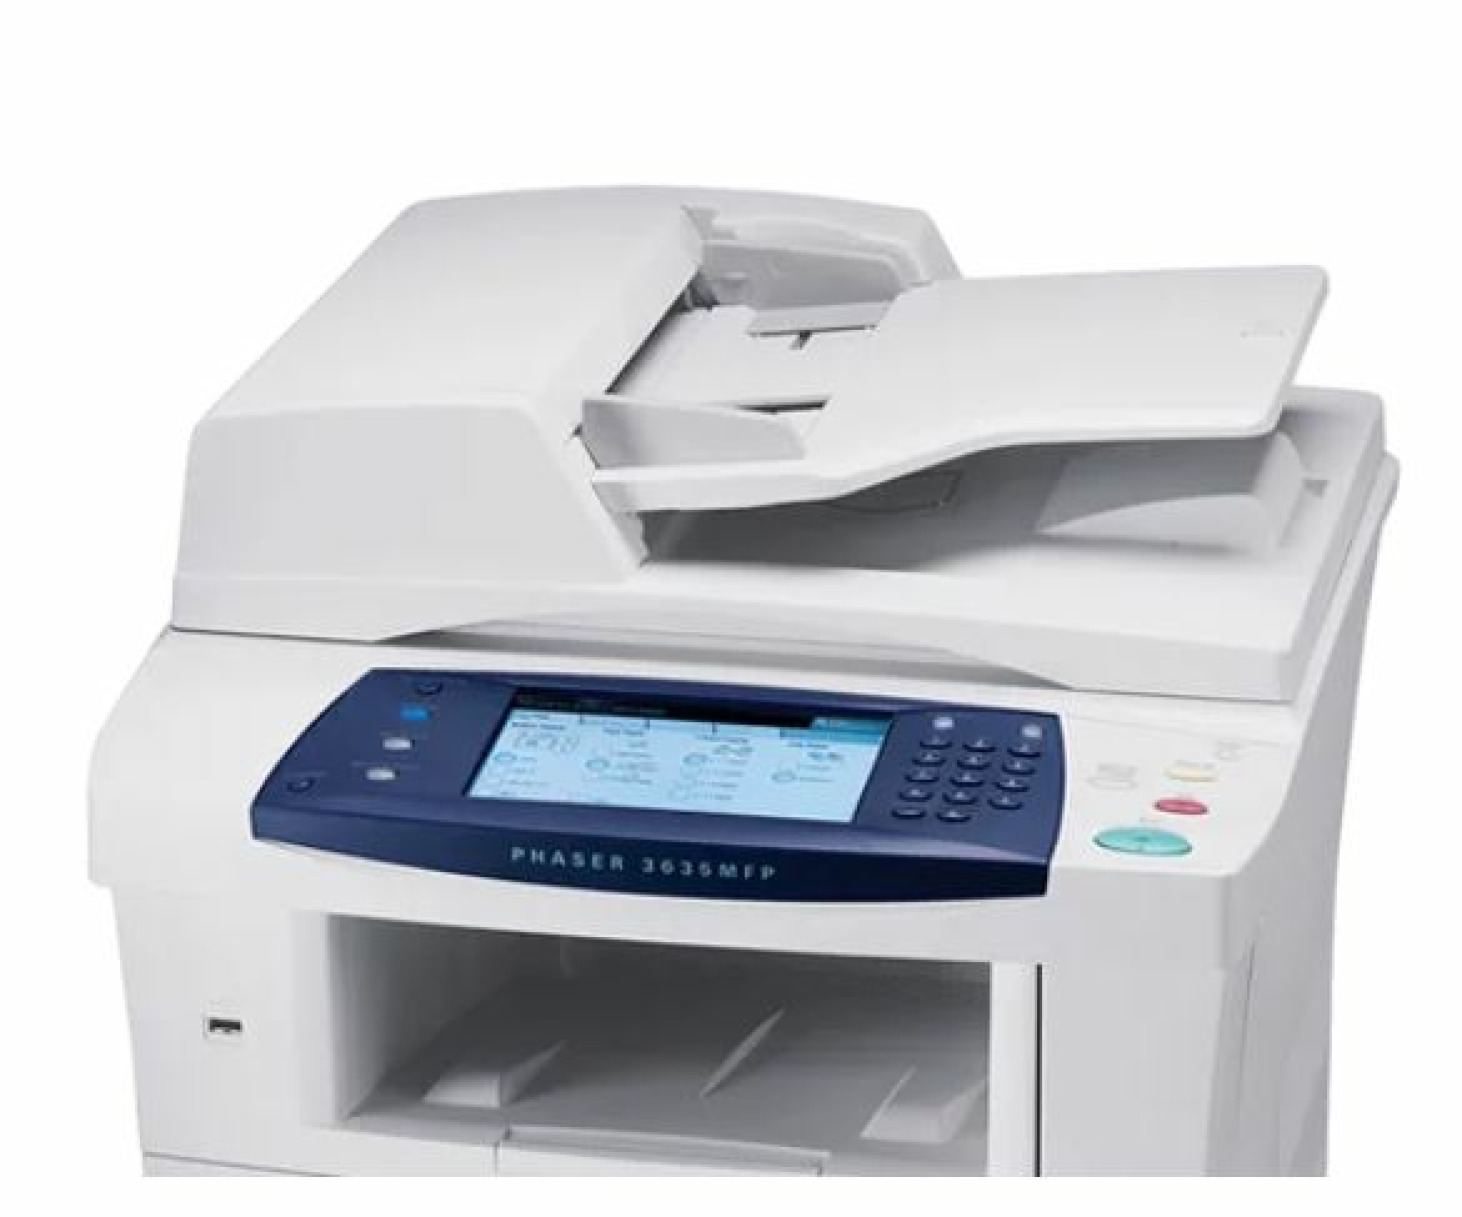 All in one Printer Xerox Phaser 3635 MFP Used A Bluetooth Rj-11 Usb &lt;300K pages A4 A5 B/W Laser-Printer Unlocked 7&quot;